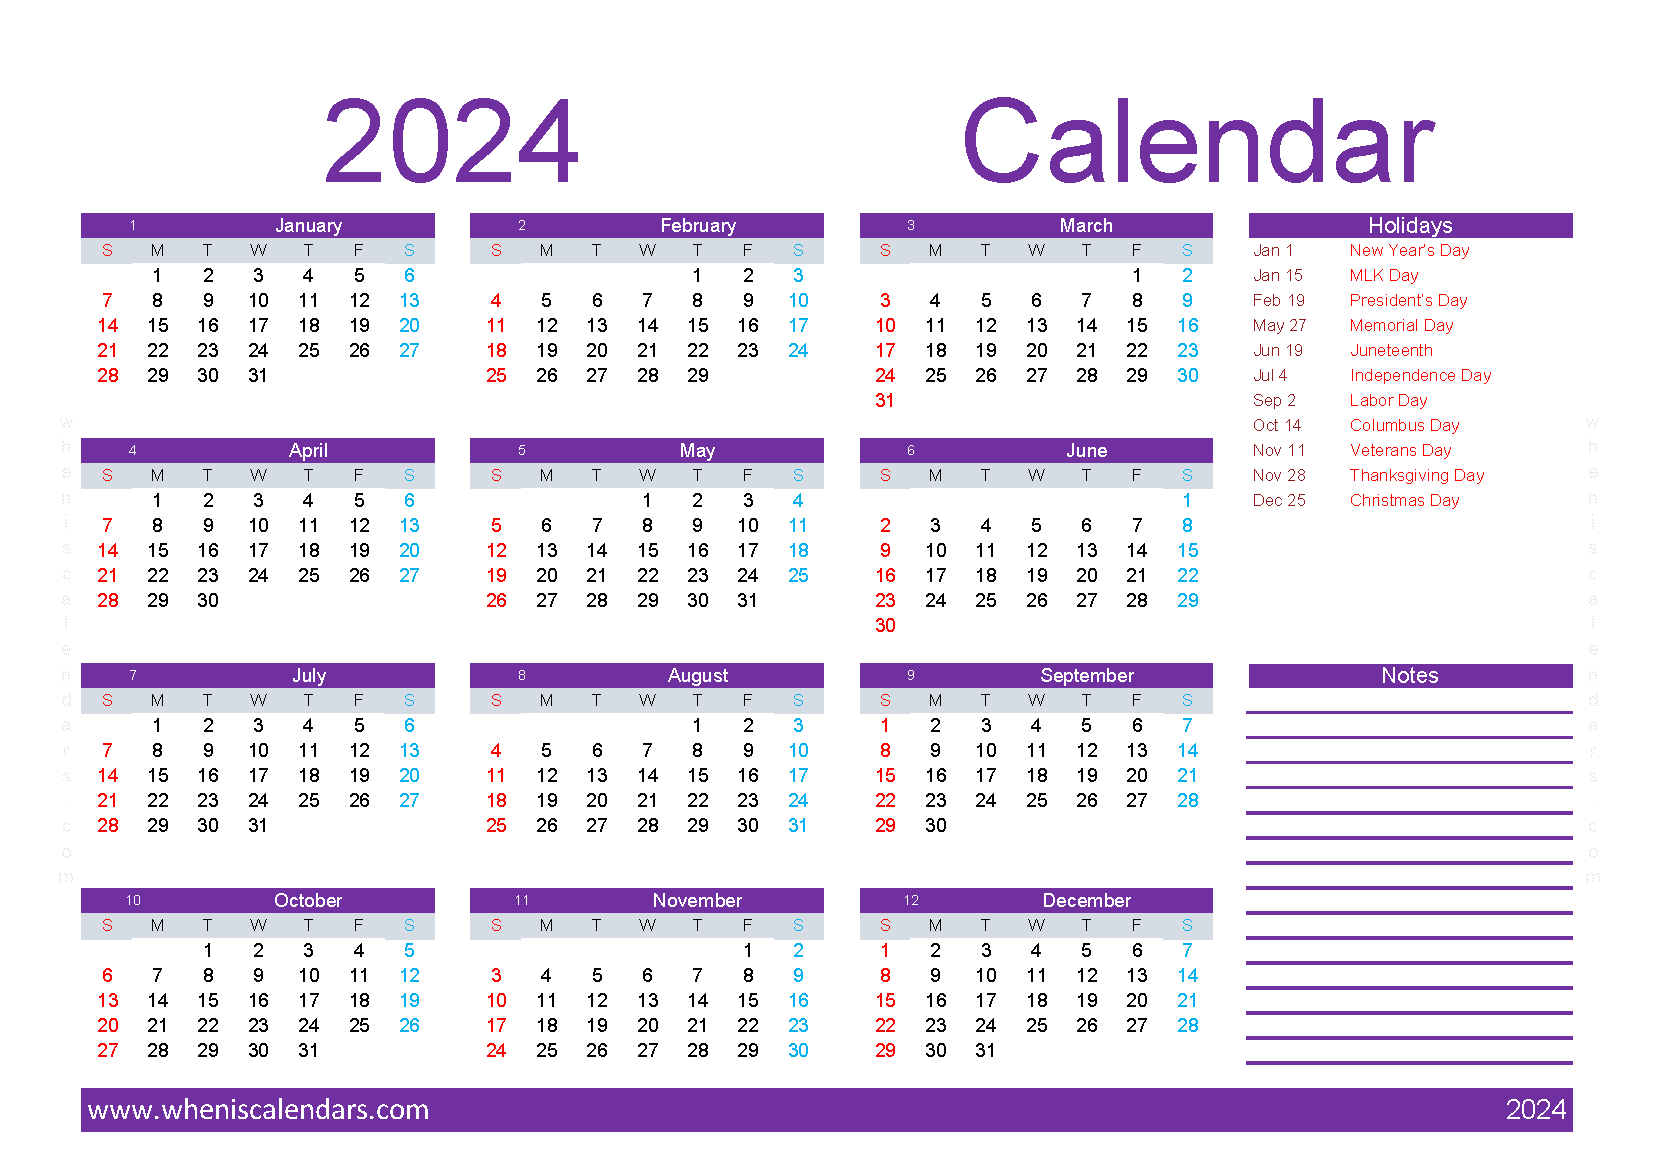 Download free Calendar 2024 with Holidays printable A5 in horizontal landscape